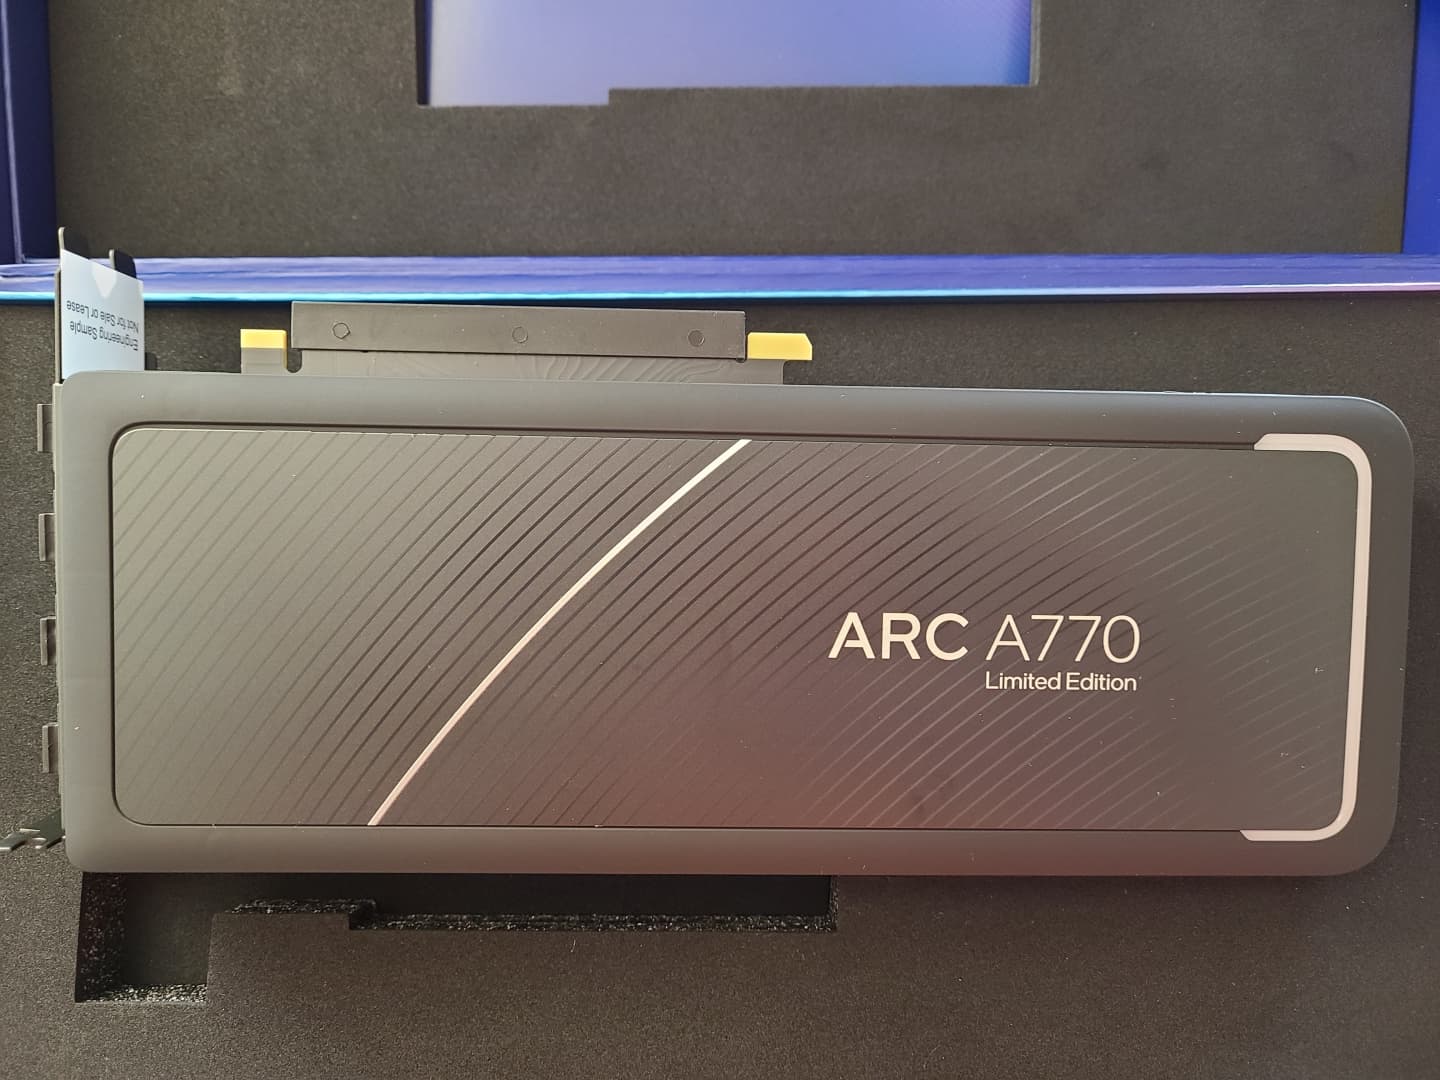 Intel Arc A770 Review - Finally a Third Competitor